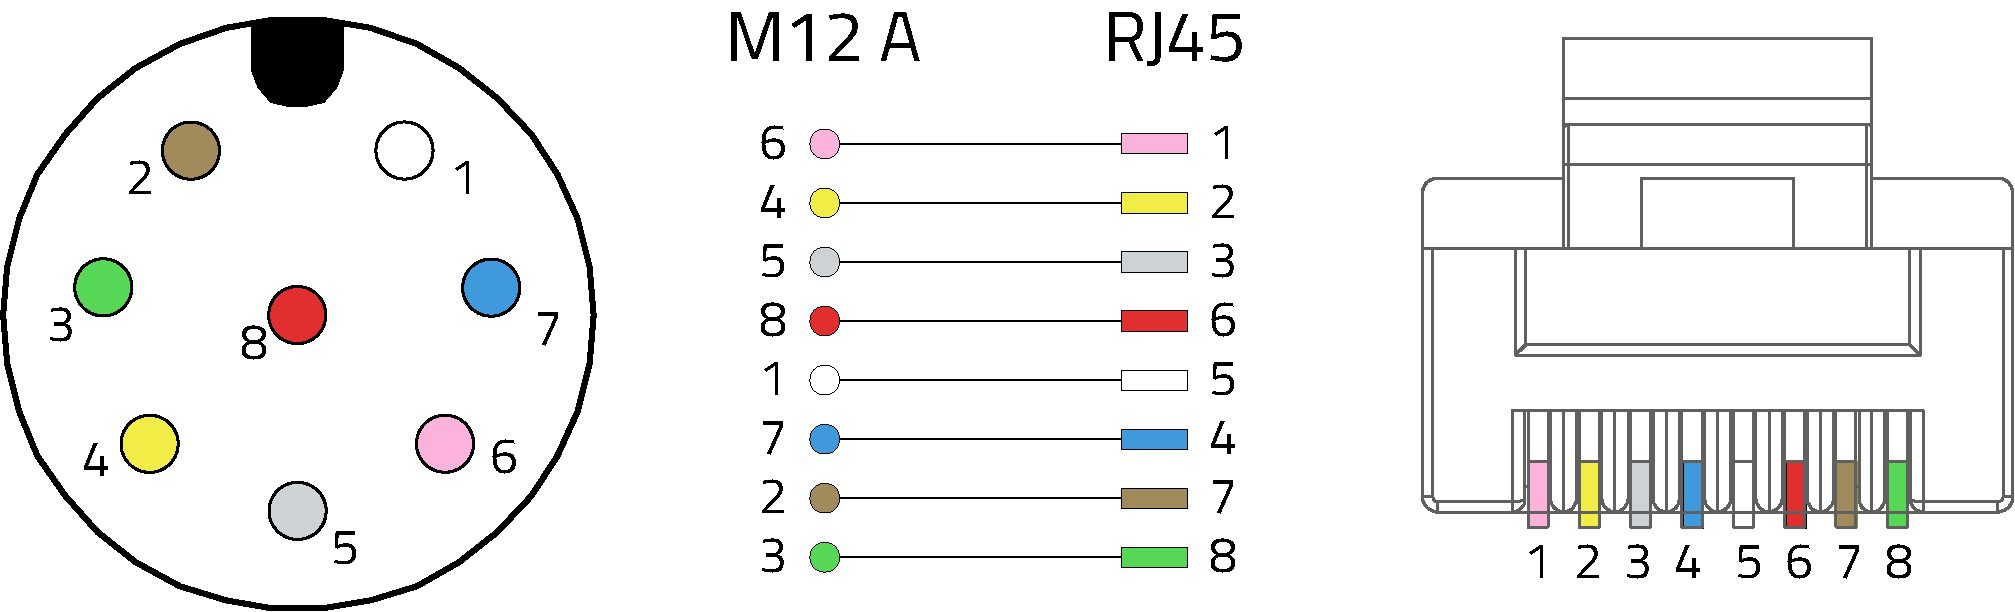 10BASE-T transmission: Recommendation for wiring an RJ45 (8P8C modular plug) with an M12 A-coded circular connector.